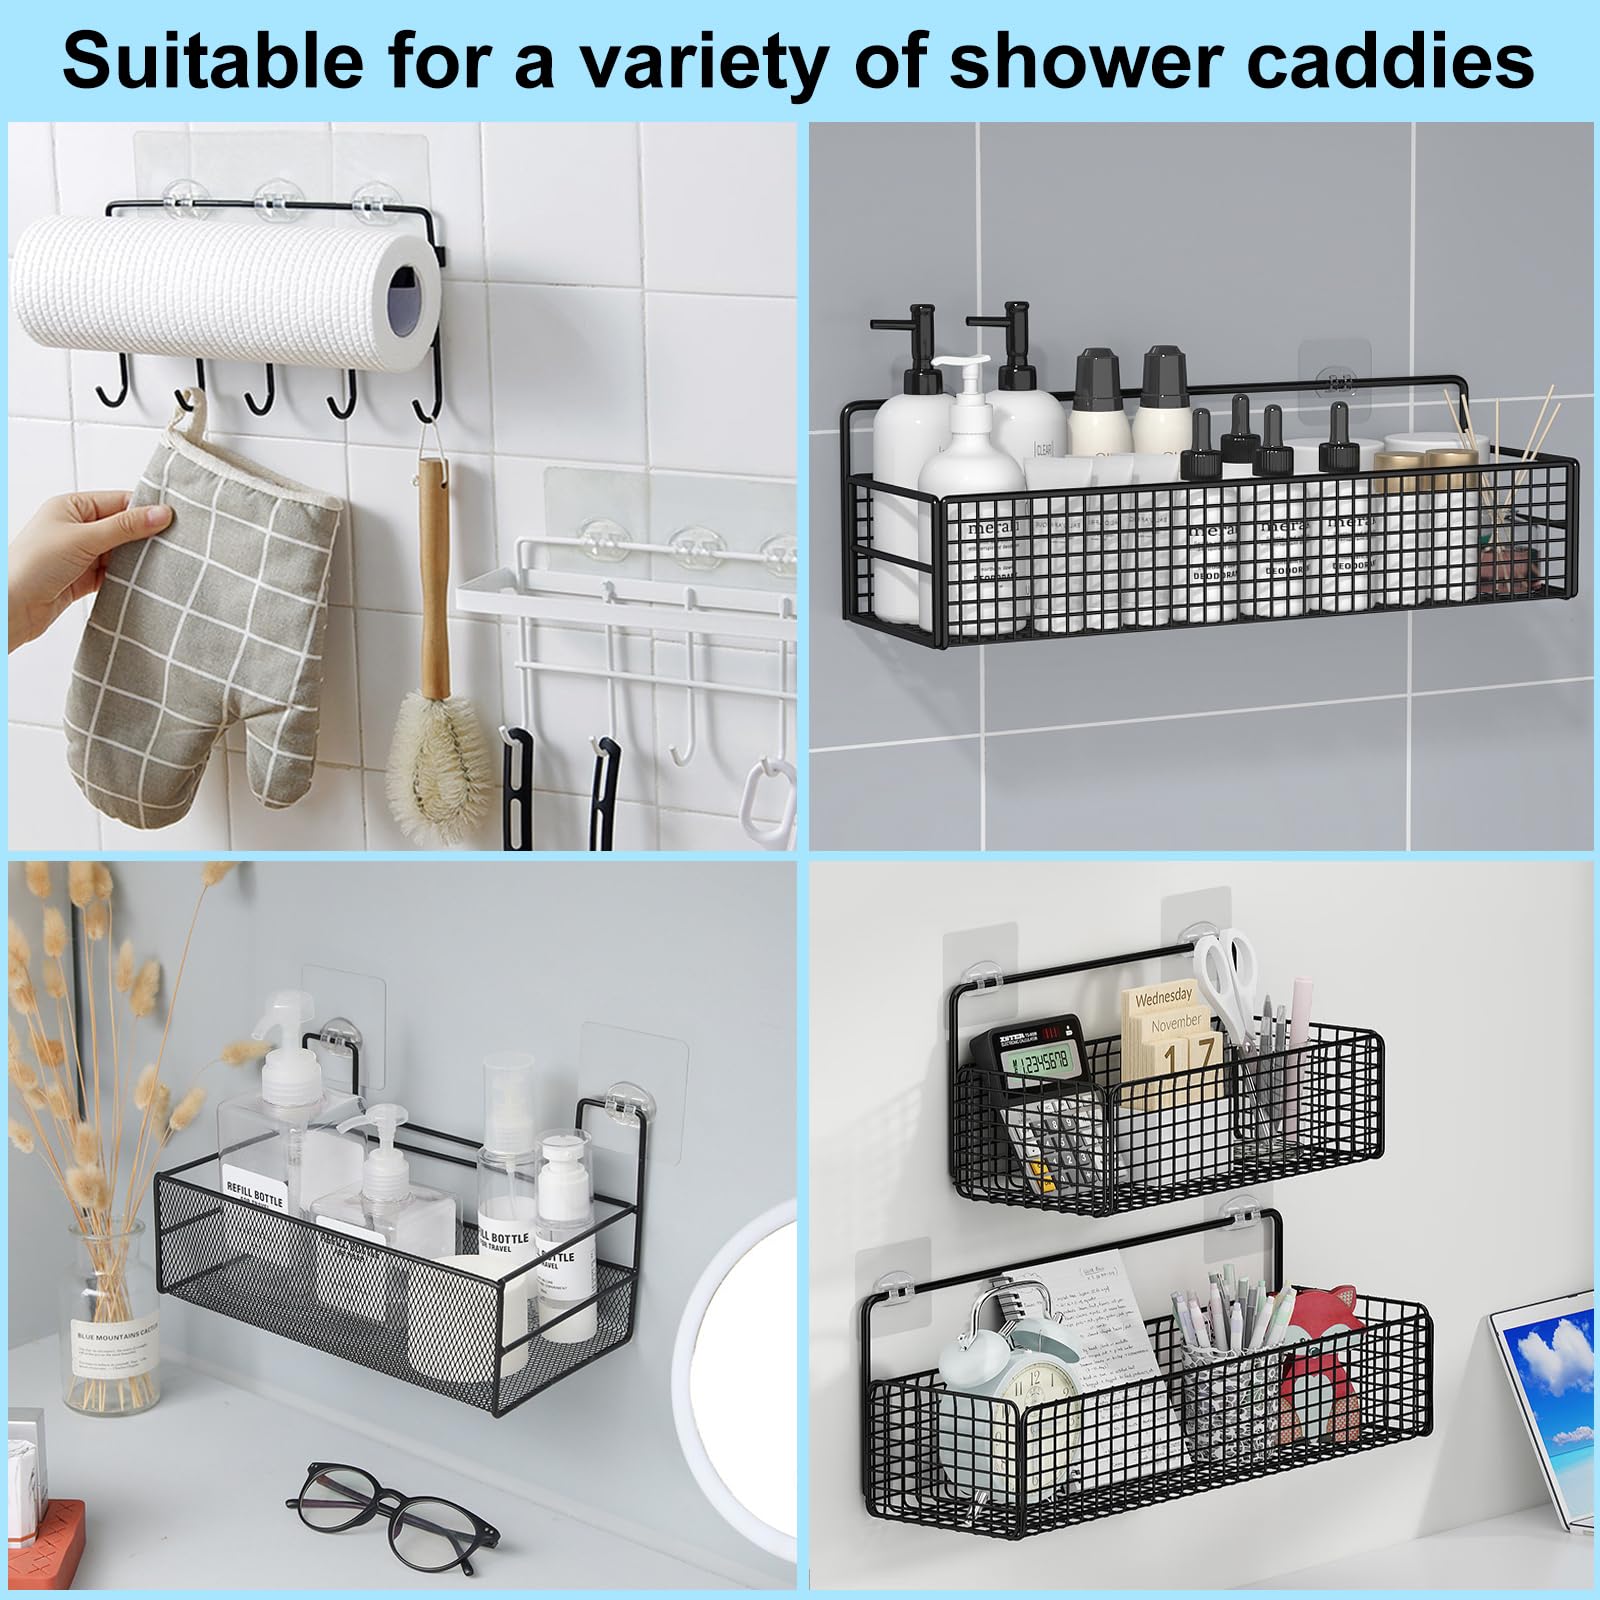 Shower Caddy Adhesive Replacement Stickers Hooks Adhesive Pack of 10 for  Corner Shelf Basket Bathroom Shelf, Shower Caddy Hanging